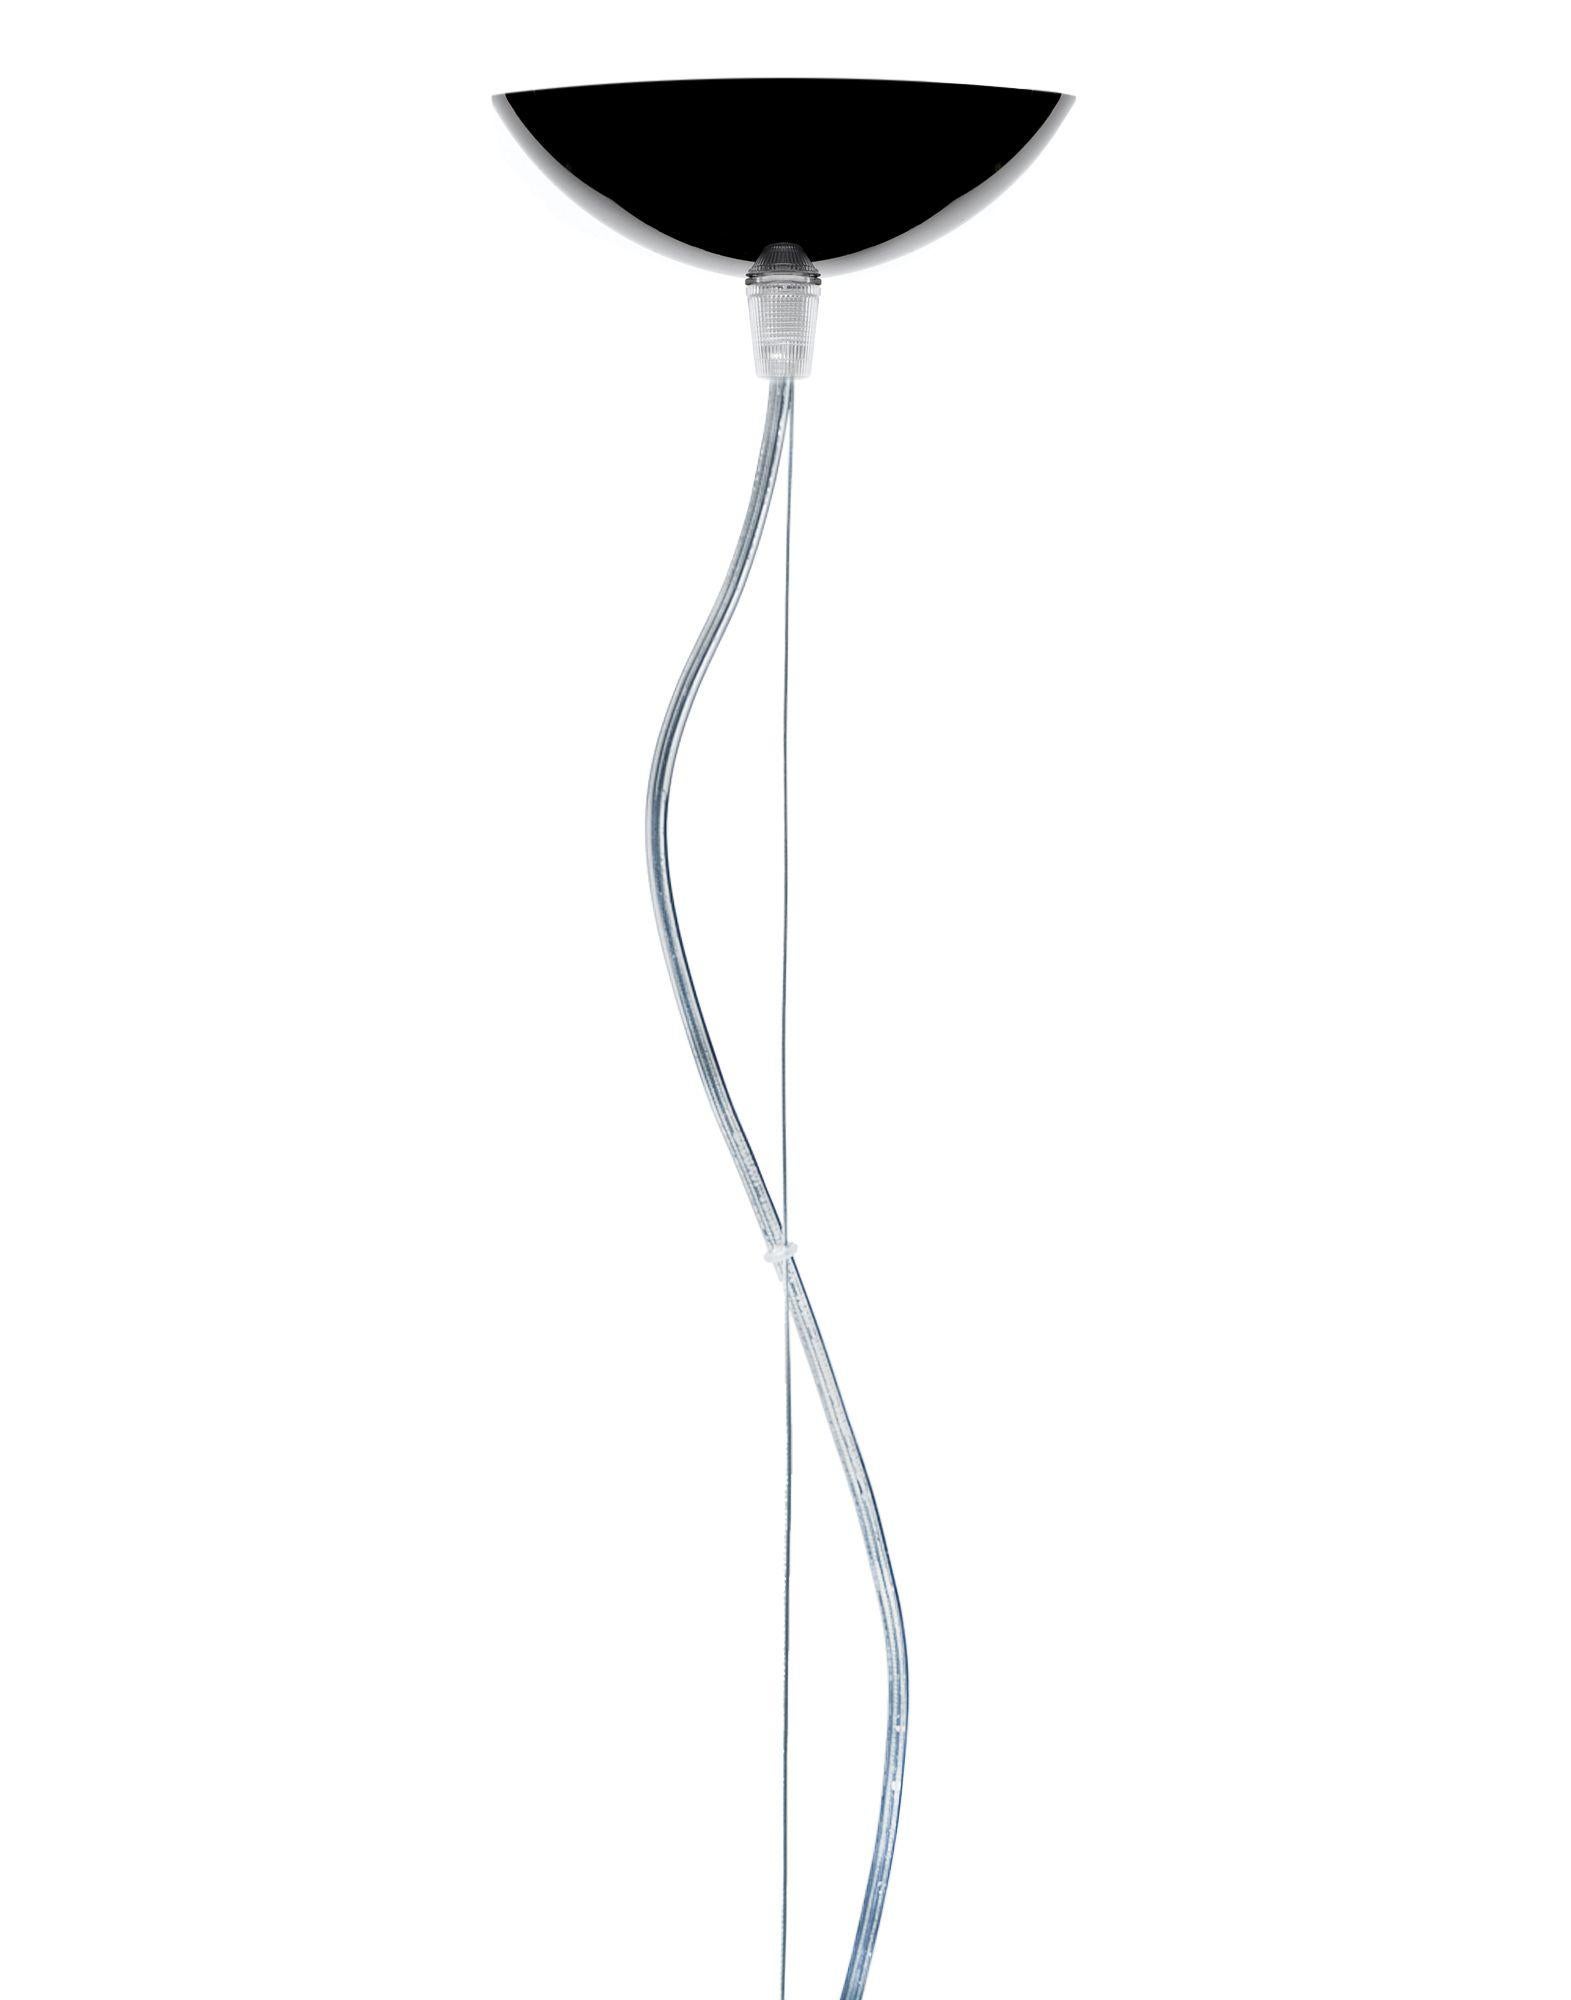 An essential lamp which is characterised by the “subtle interpretations of the theme. Made in transparent methacrylate in glossy black, the cover is not perfectly hemispherical but the cut-off is underneath the height of the diameter to collect the